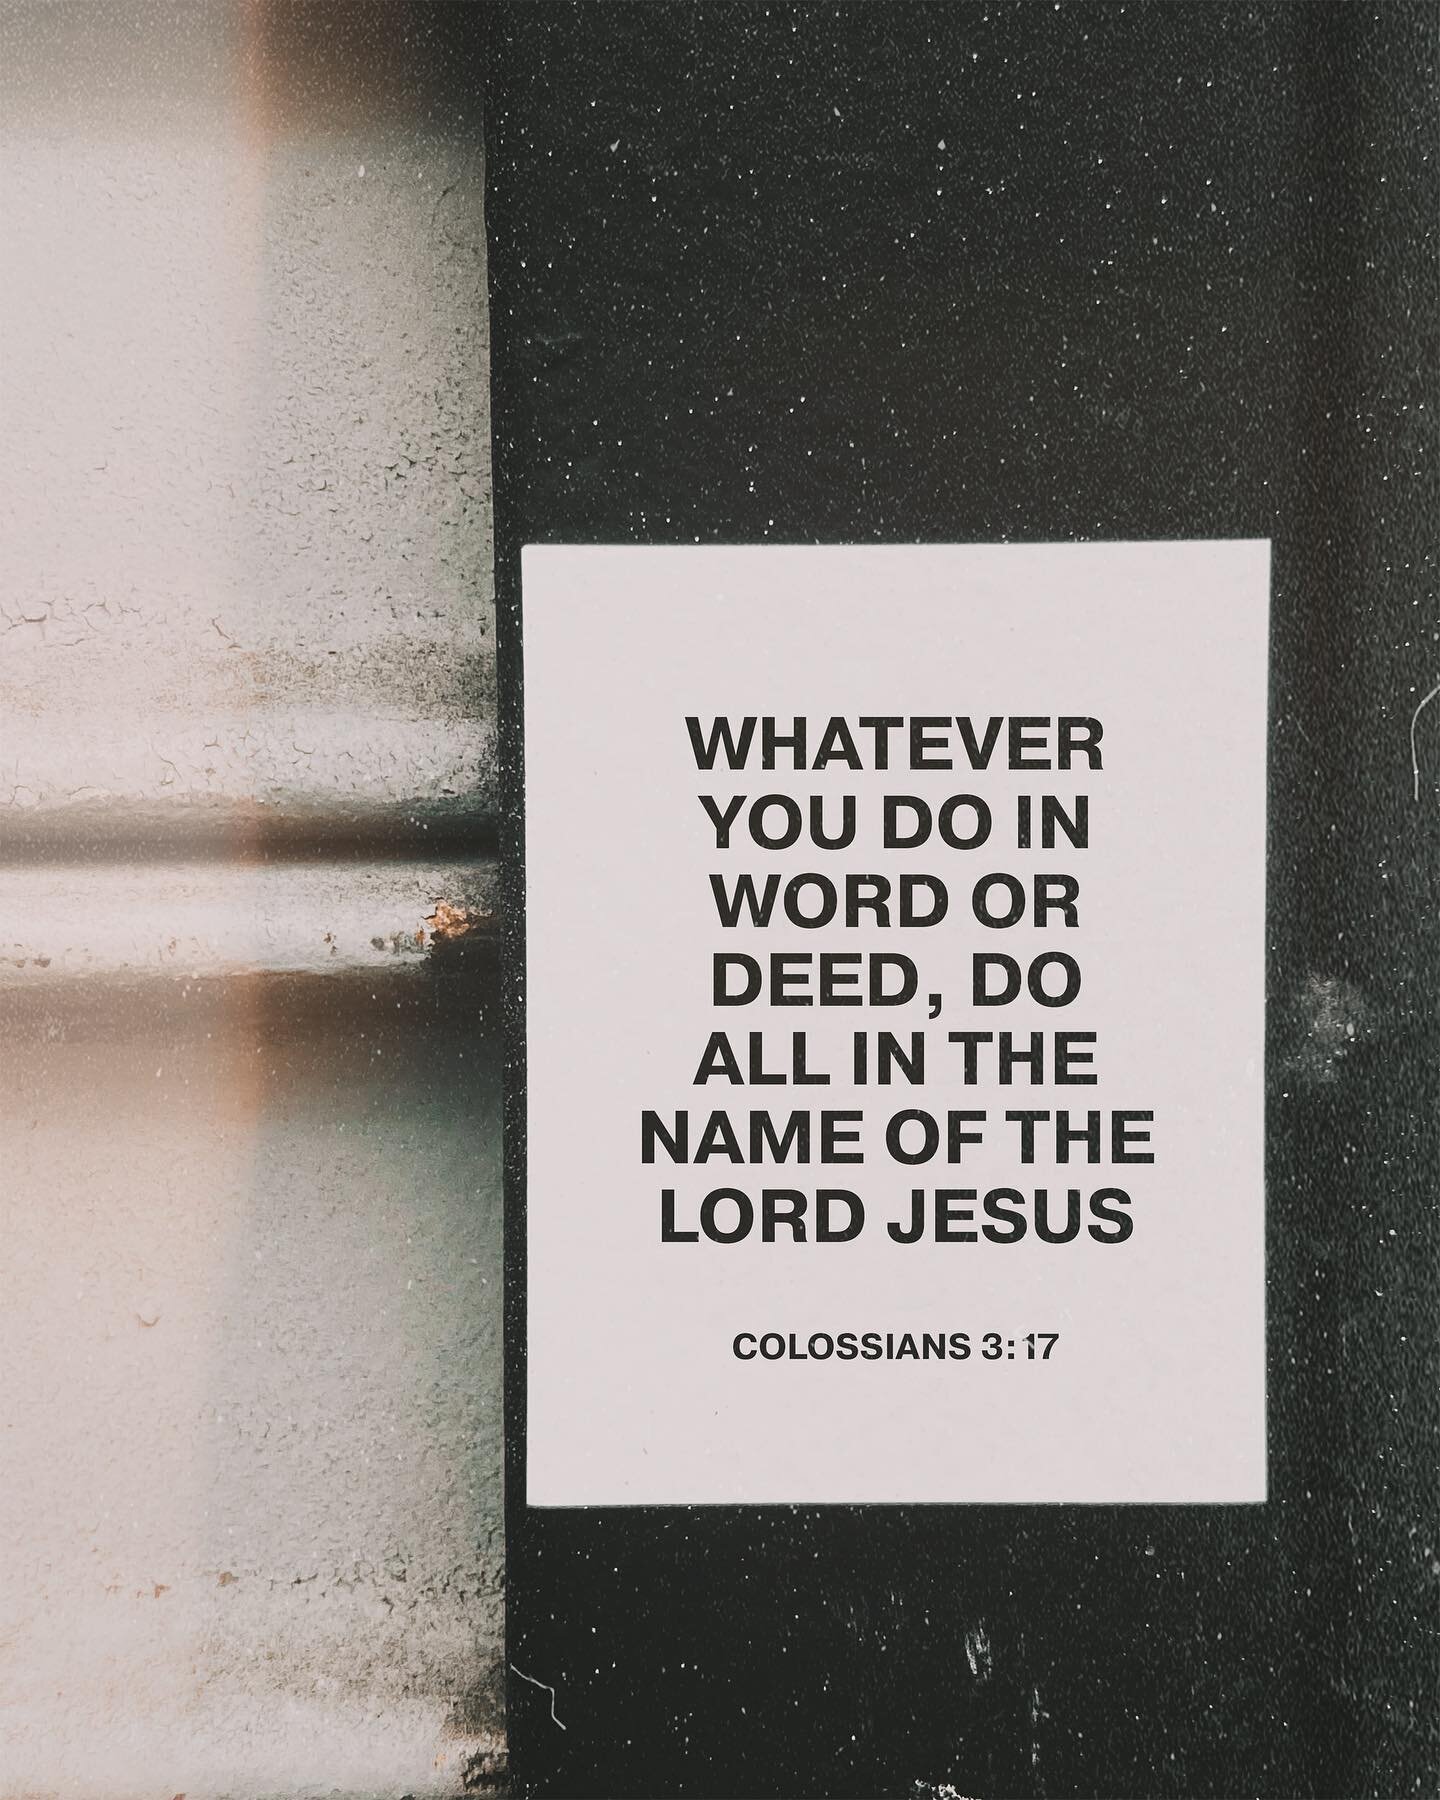 Whatever you say. Whatever you do. Remember, as a Believer, you are a representative of Jesus.